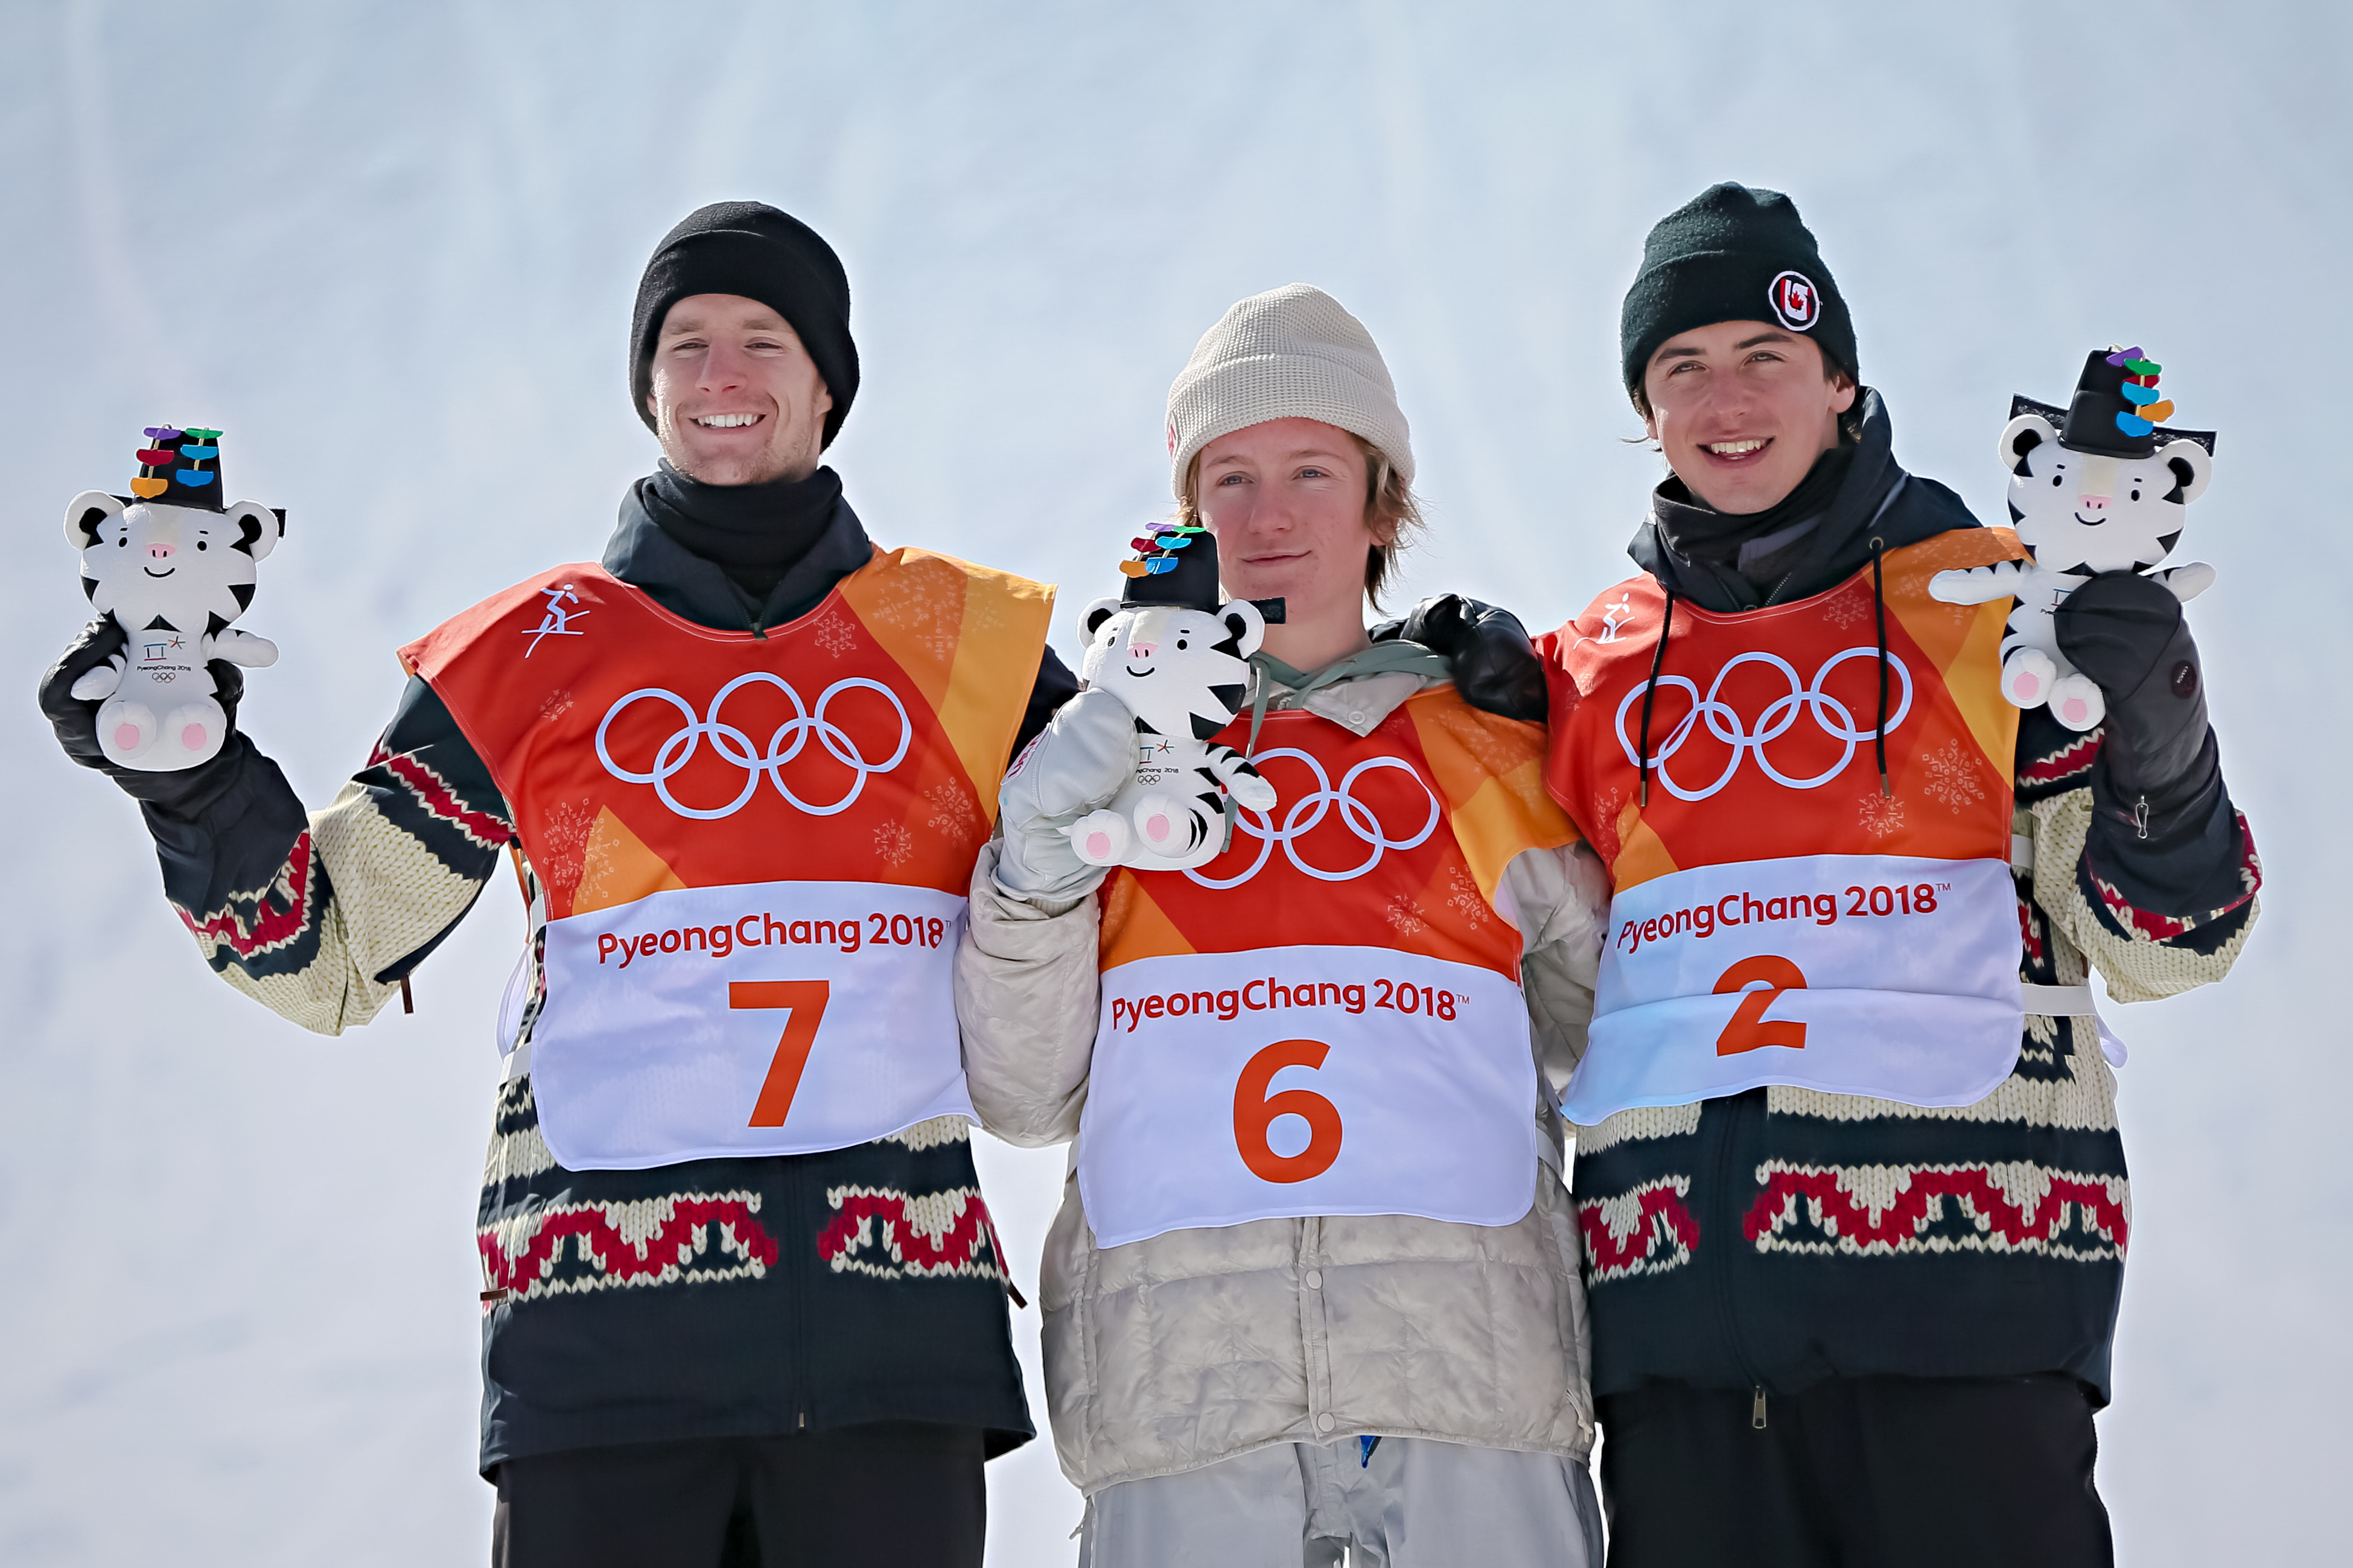 Max Parrot wins the silver medal, Red Gerard wins the gold medal, Mark Mcmorris of Canada wins the bronze medal during the Snowboarding Men's Slopestyle Finals at Pheonix Snow Park on February 11, 2018 in Pyeongchang-gun, South Korea. (Laurent Salino/Agence Zoom—Getty Images)